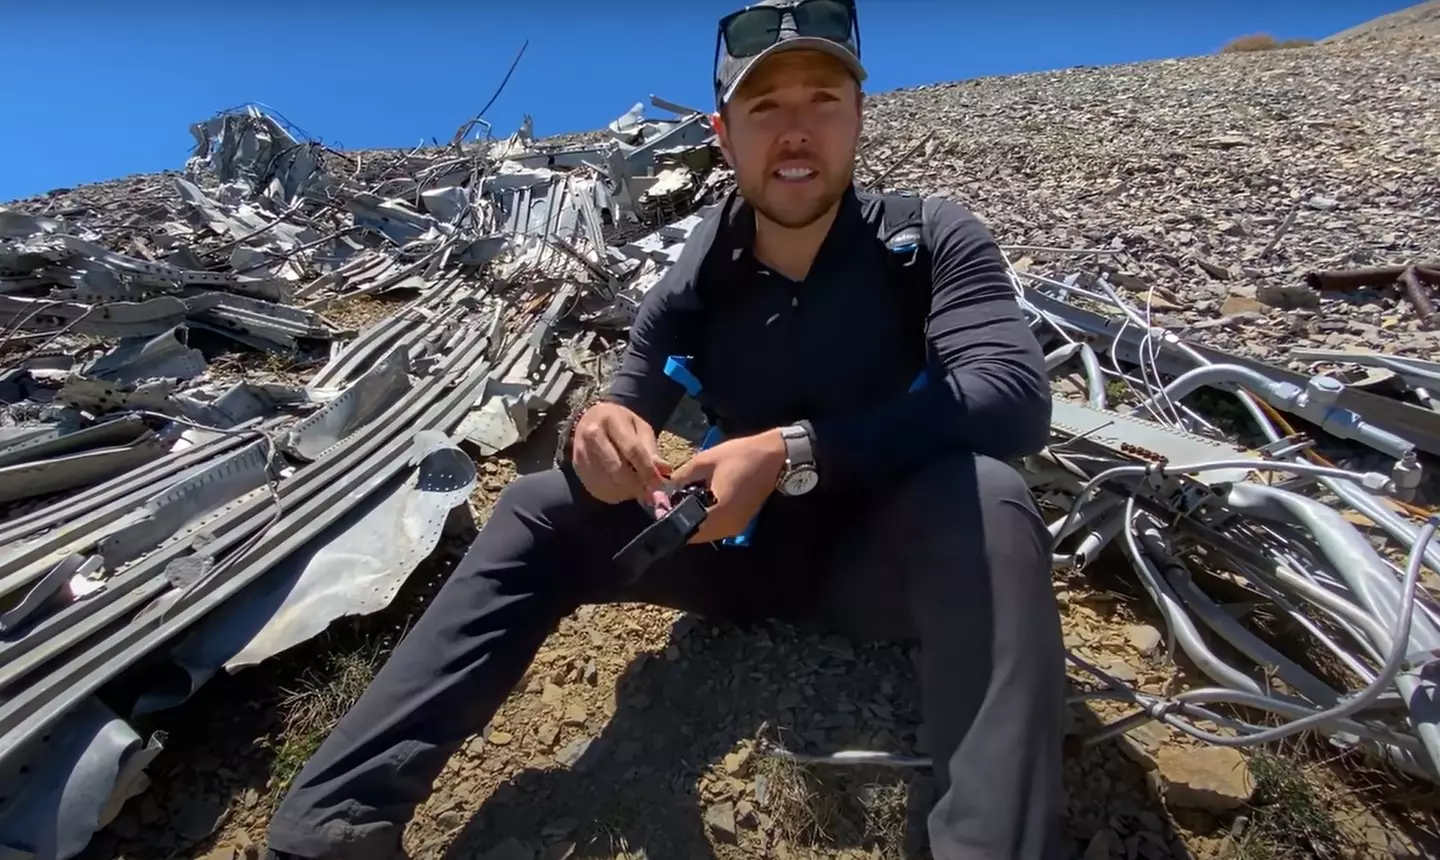 Mark Vin found the wreckage of a plane which is believed to have crashed while flying to Area 51.